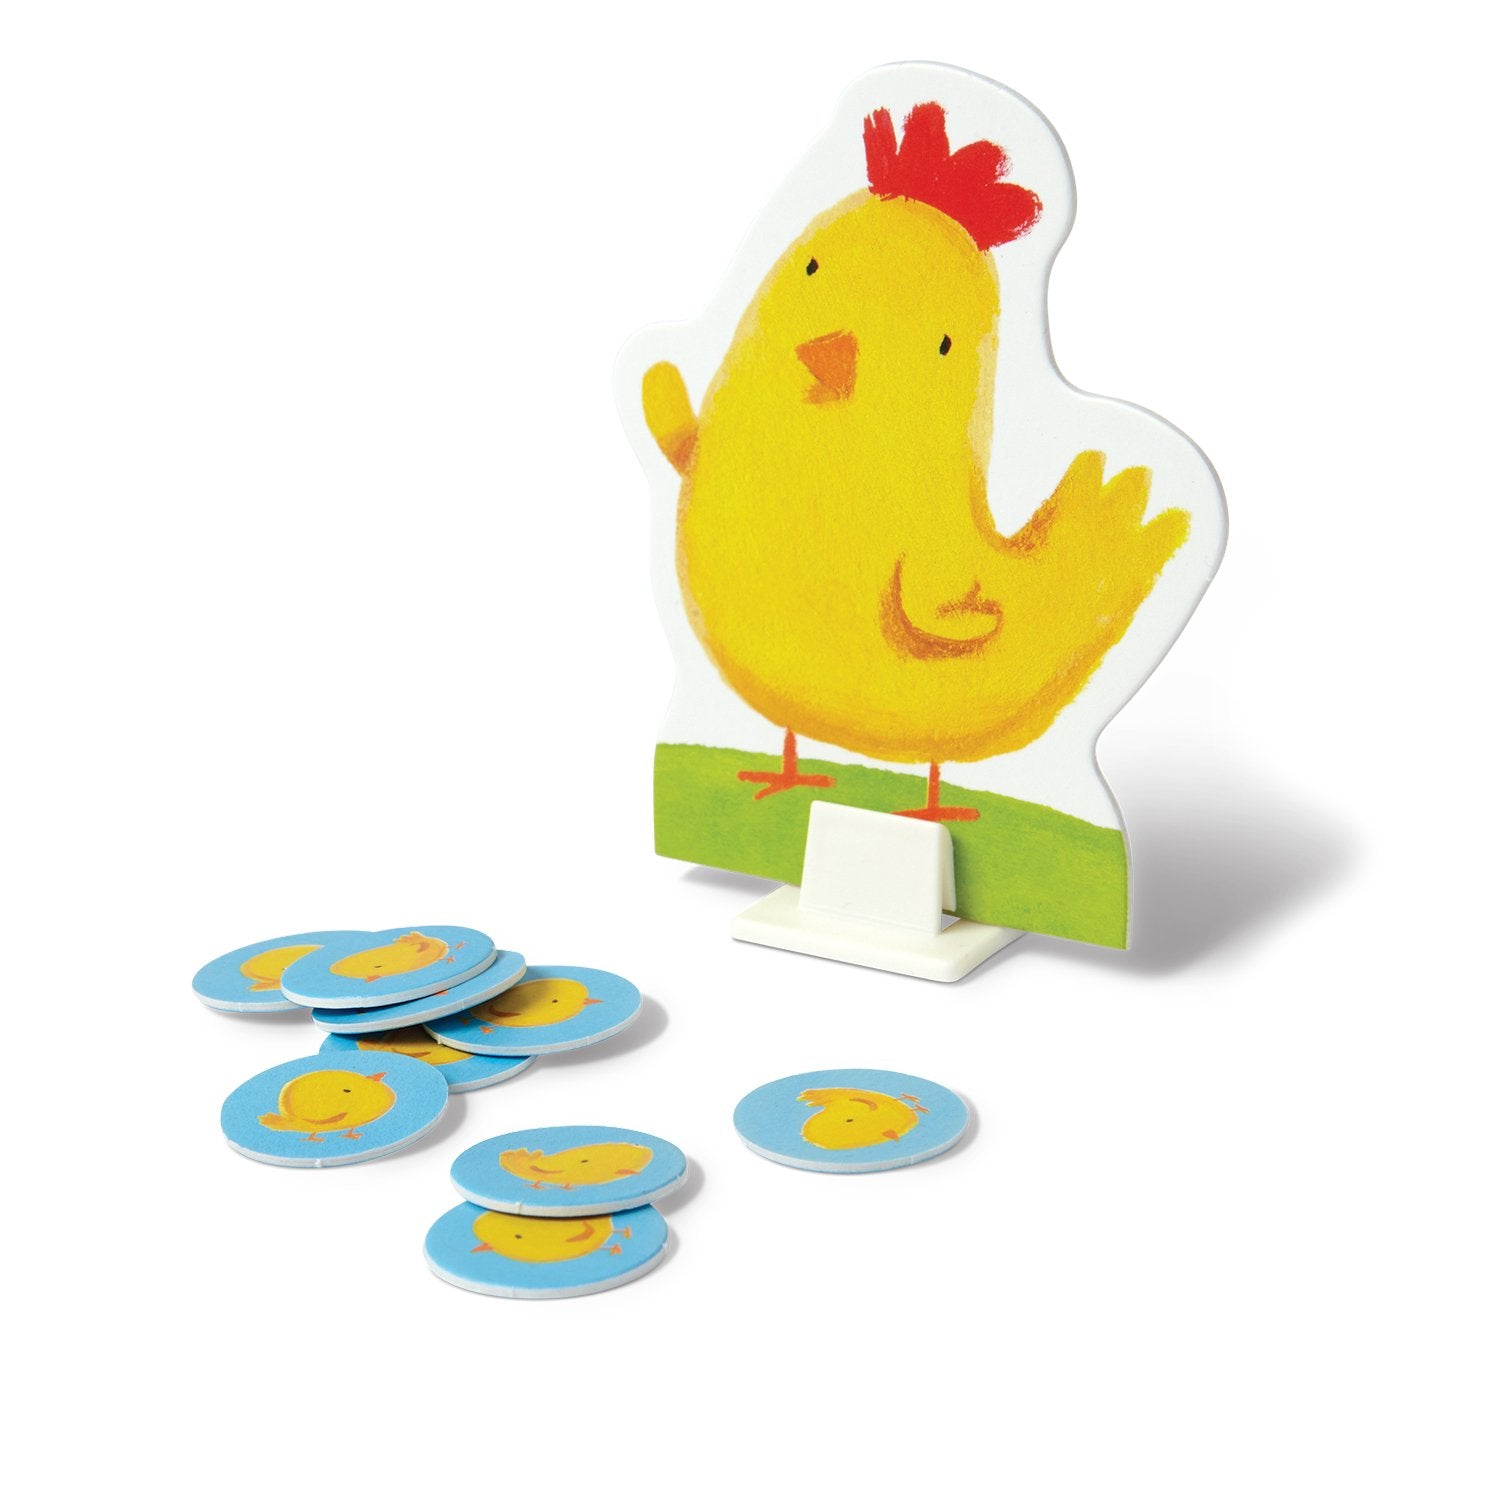 Peaceable Kingdom Count Your Chickens Award Winning Cooperative Counting Game for Kids